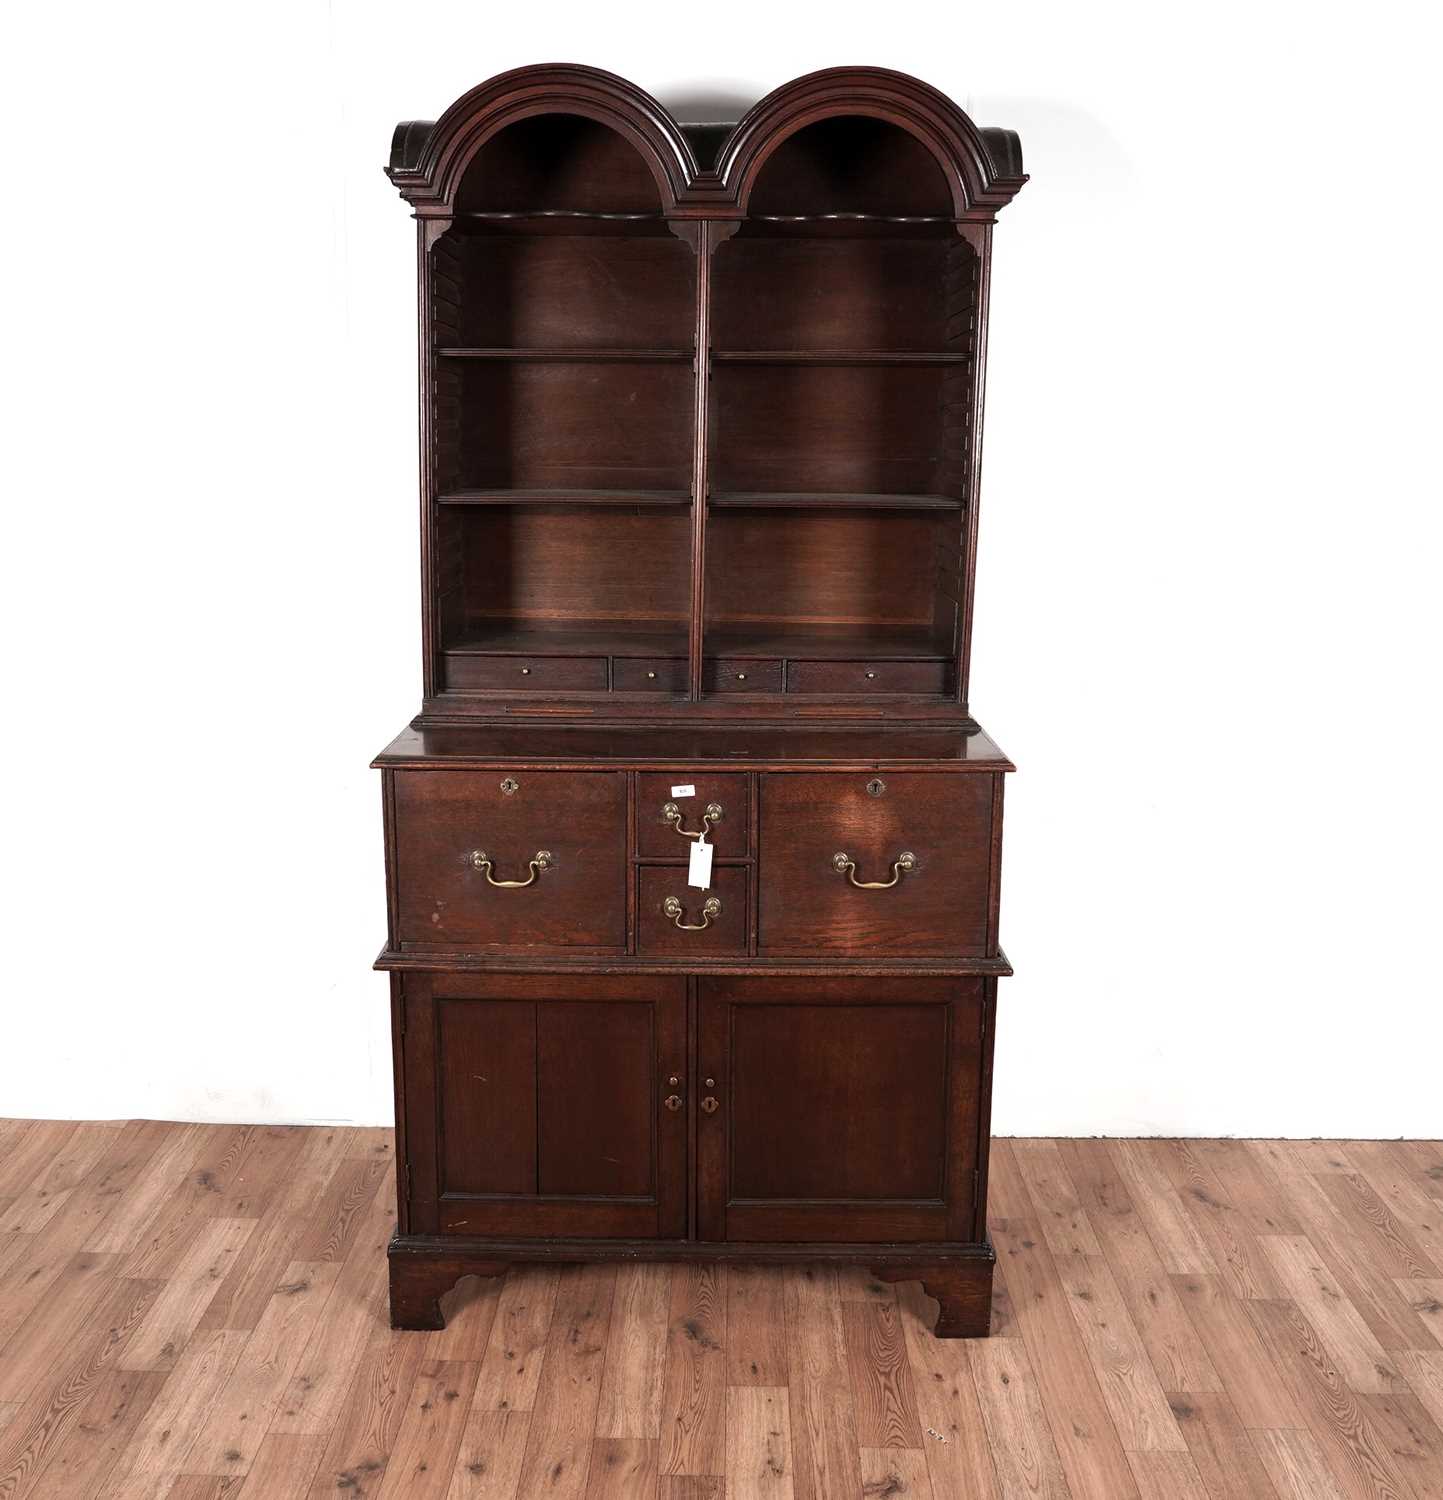 A Georgian style oak double dome bookcase cabinet - Image 2 of 6